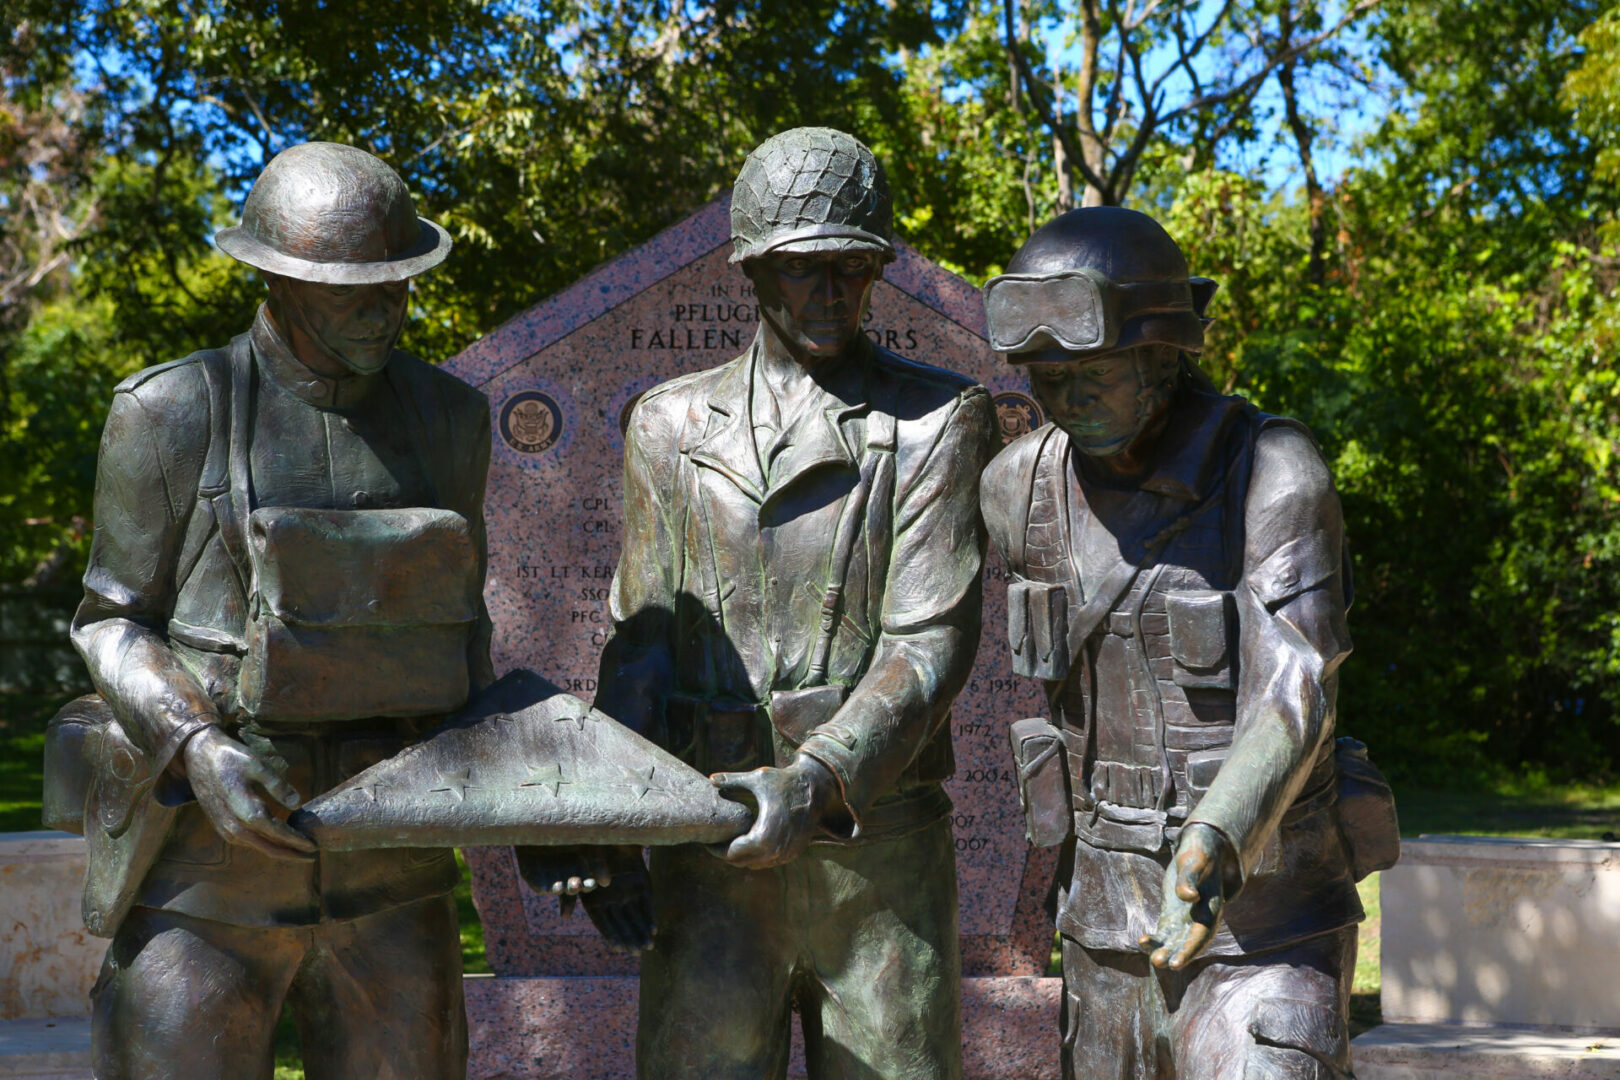 three bronze statues of men in uniforms are holding a box